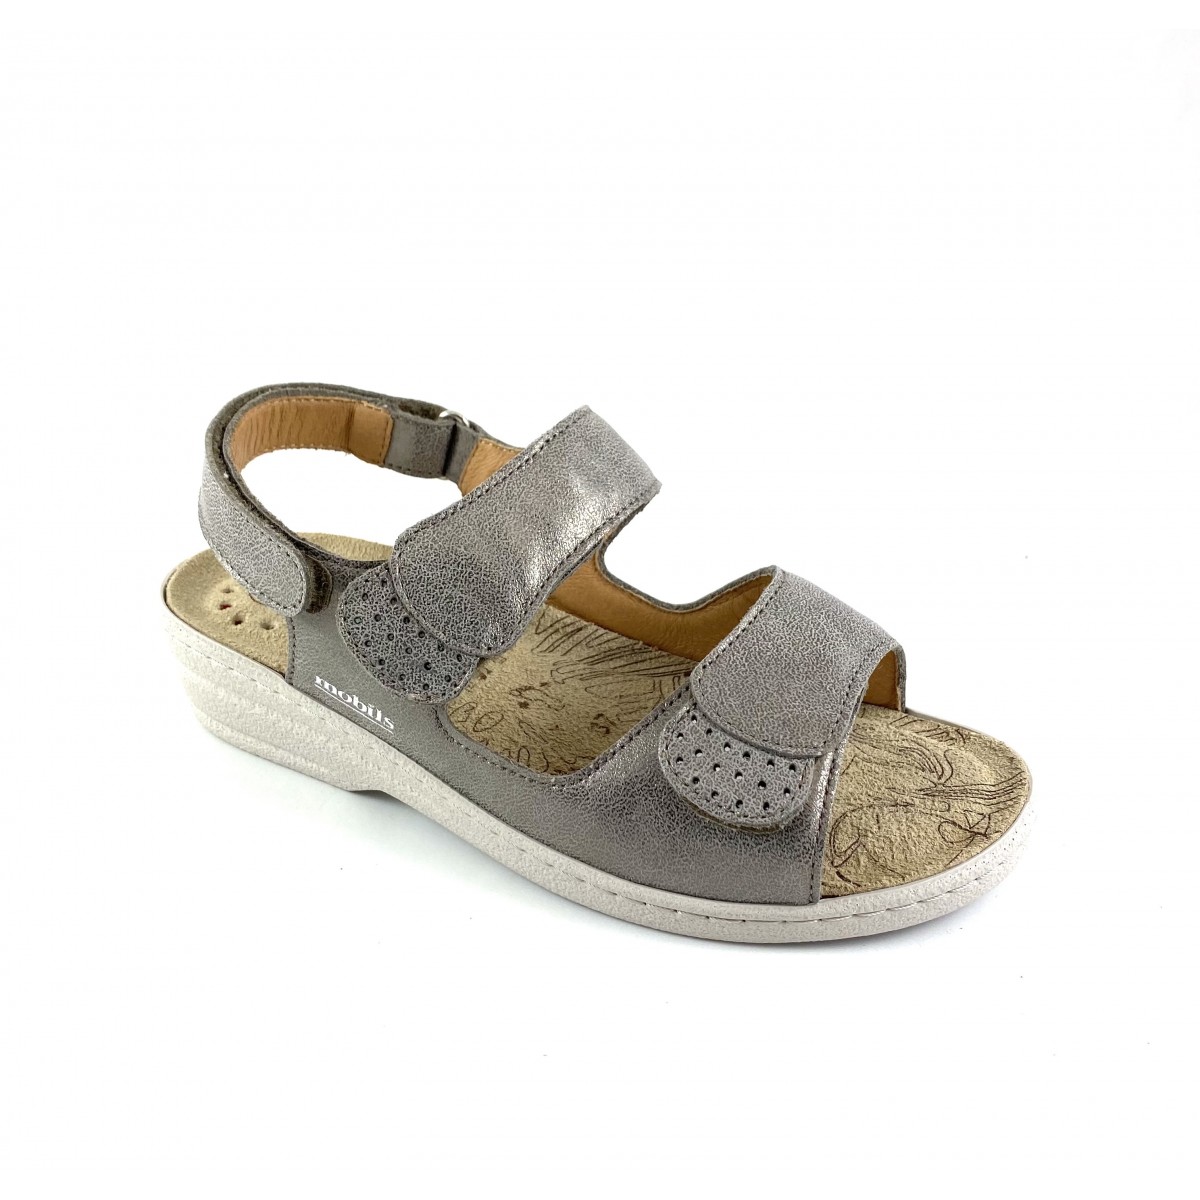 Sandalia Mujer Ancho Especial Mobils By Mephisto, Taupe Roselie